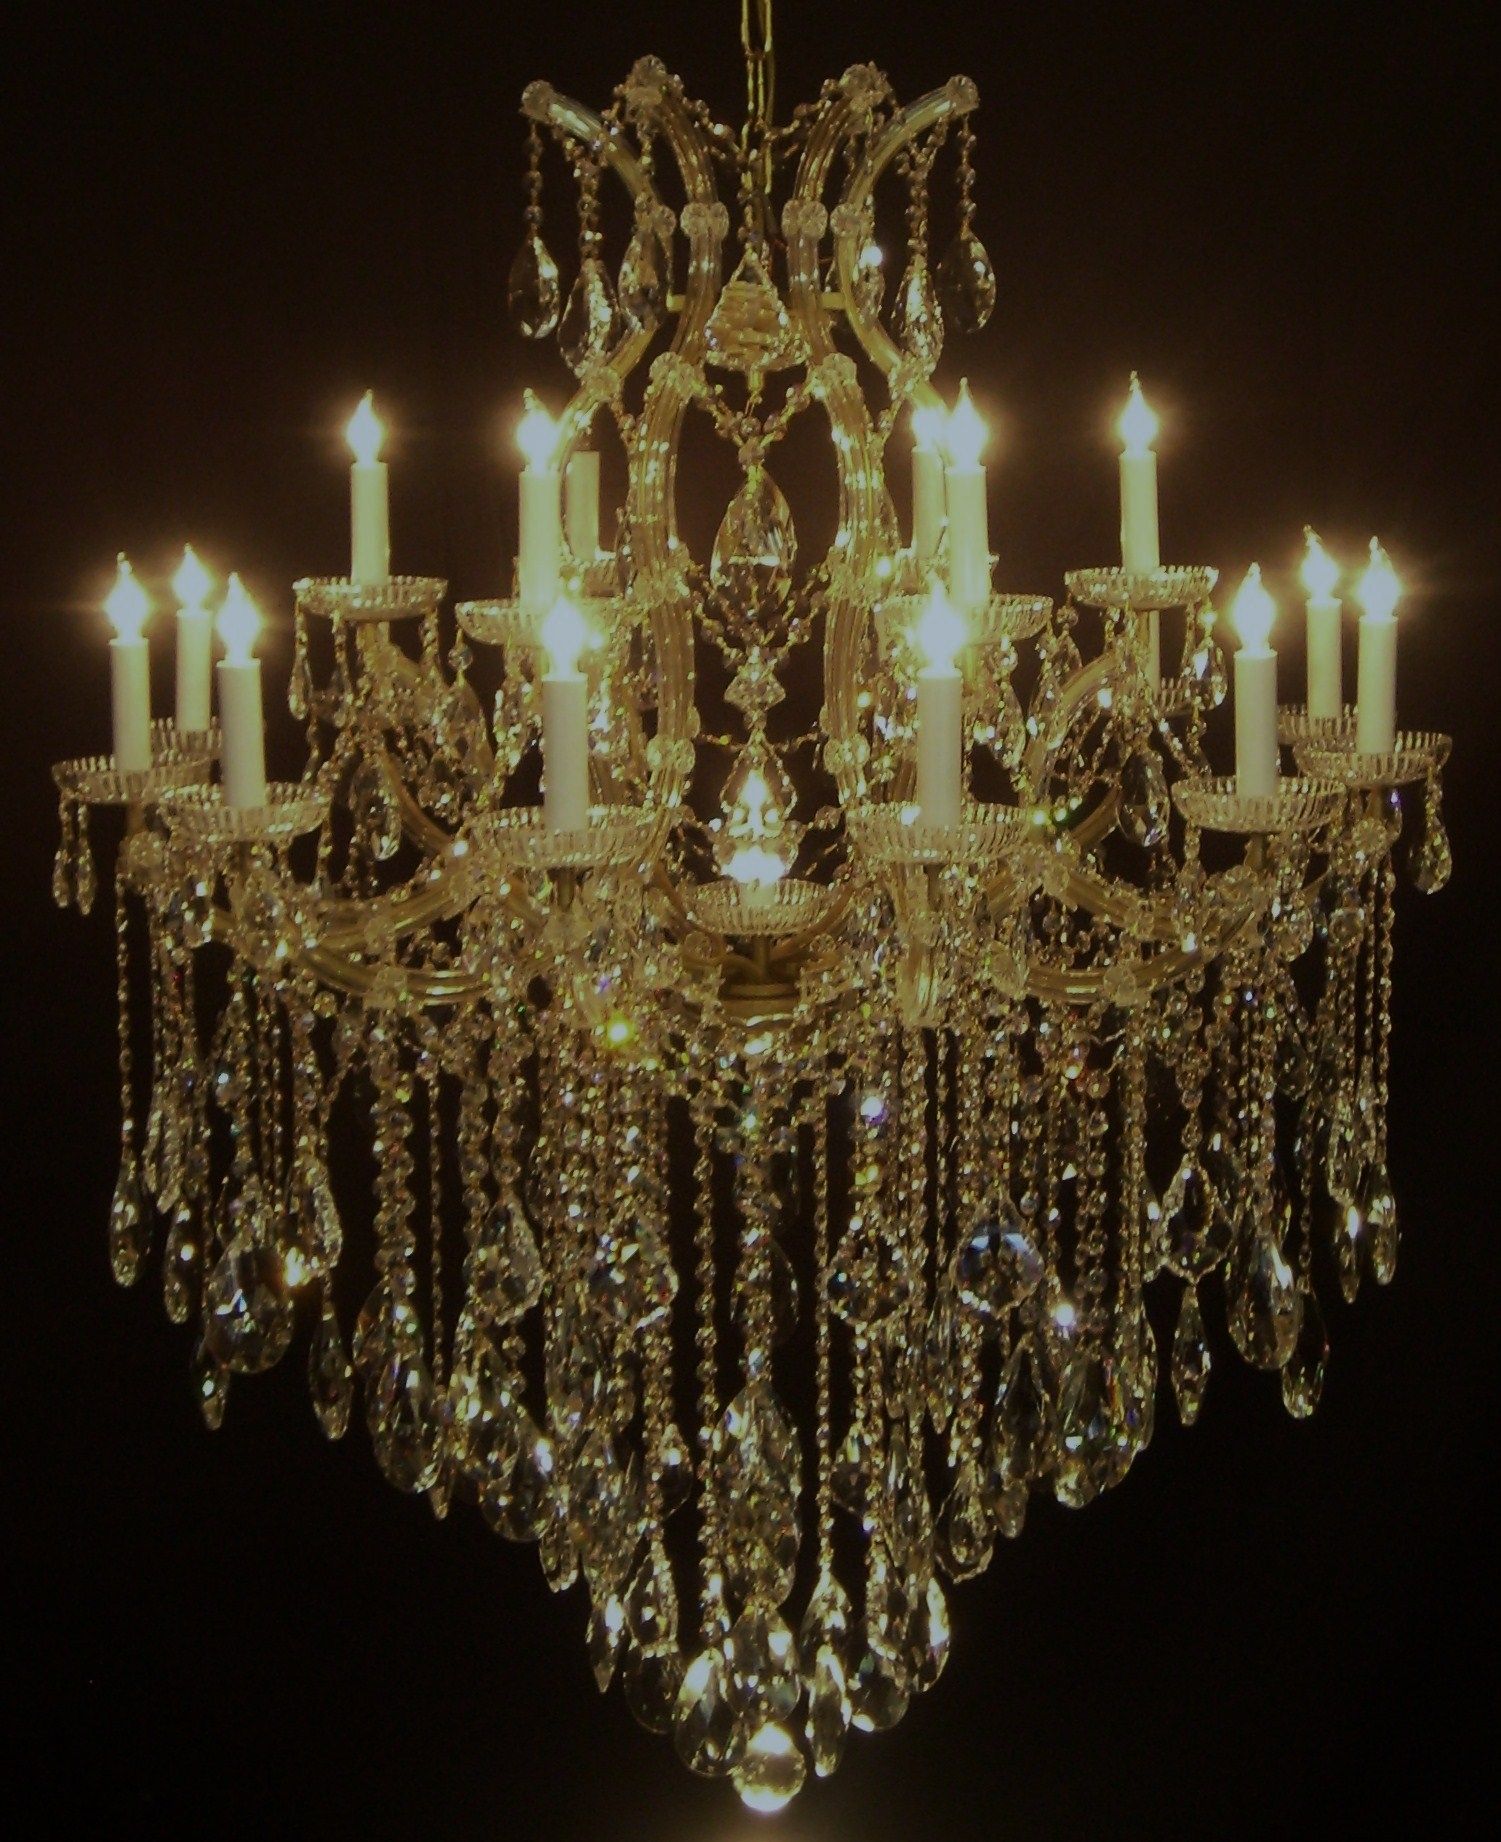 Chandeliers Mortons Antiques With Regard To Italian Chandeliers (View 9 of 12)